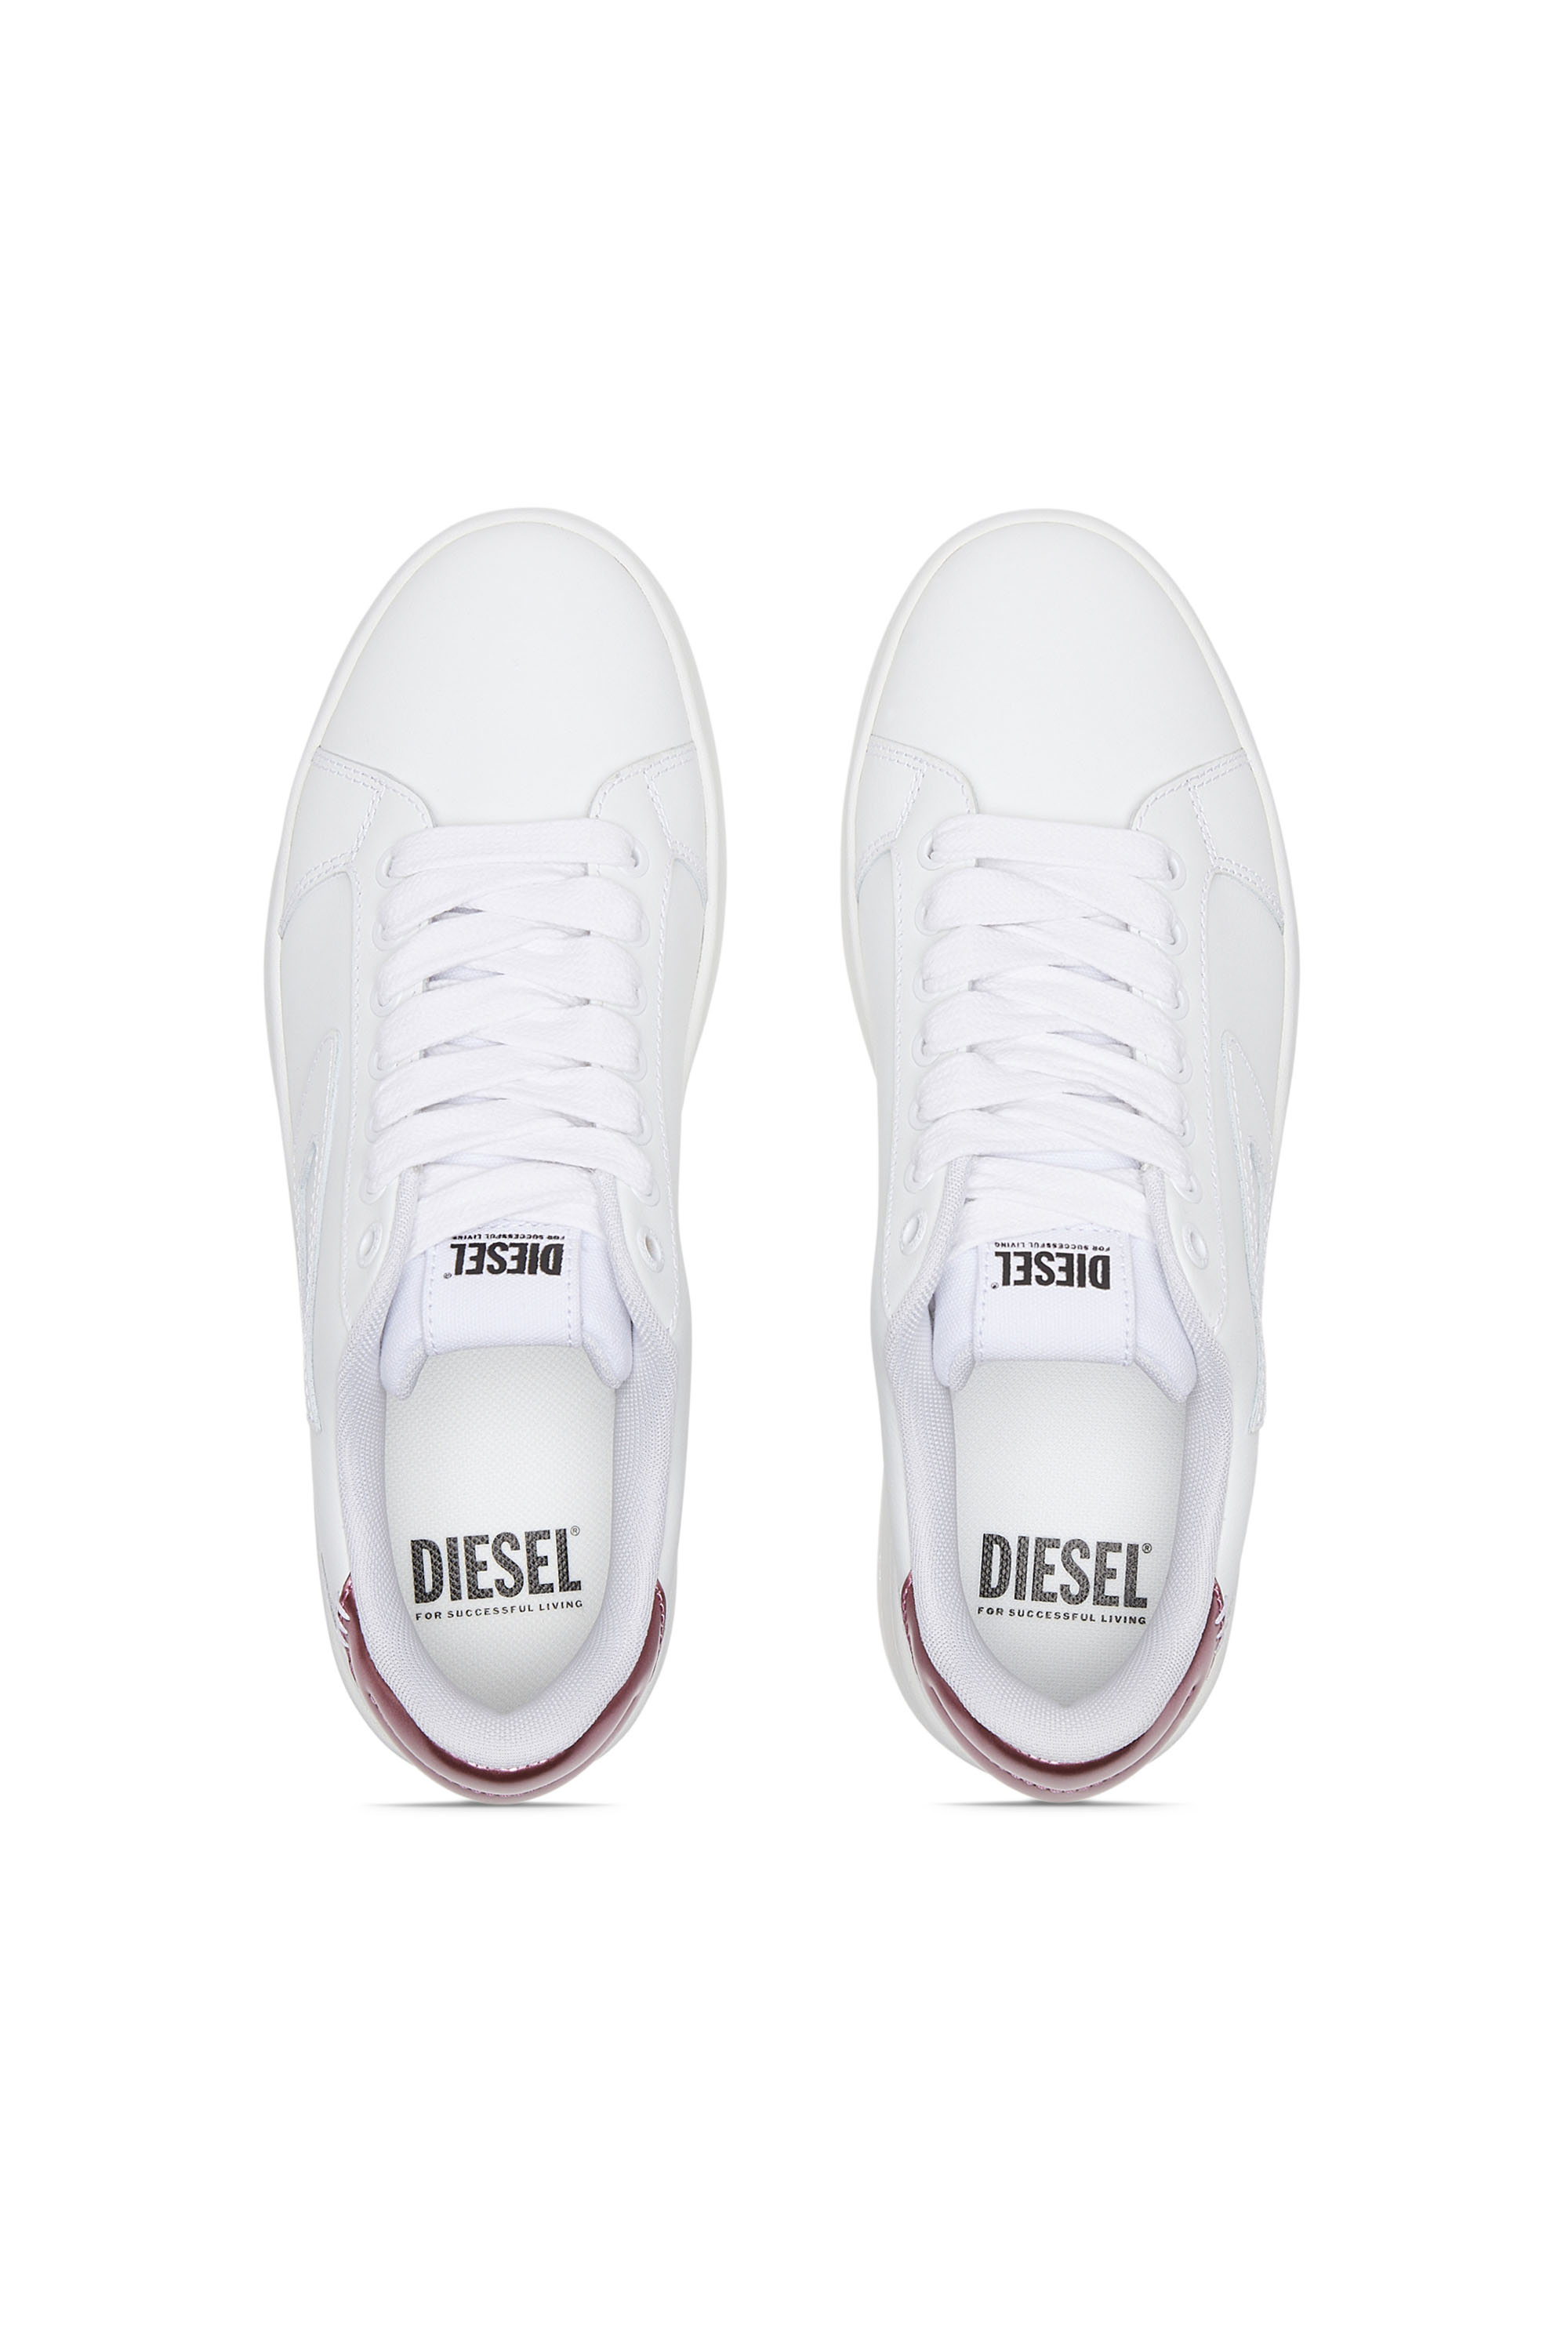 Diesel - S-ATHENE BOLD W, Weiss/Rosa - Image 5